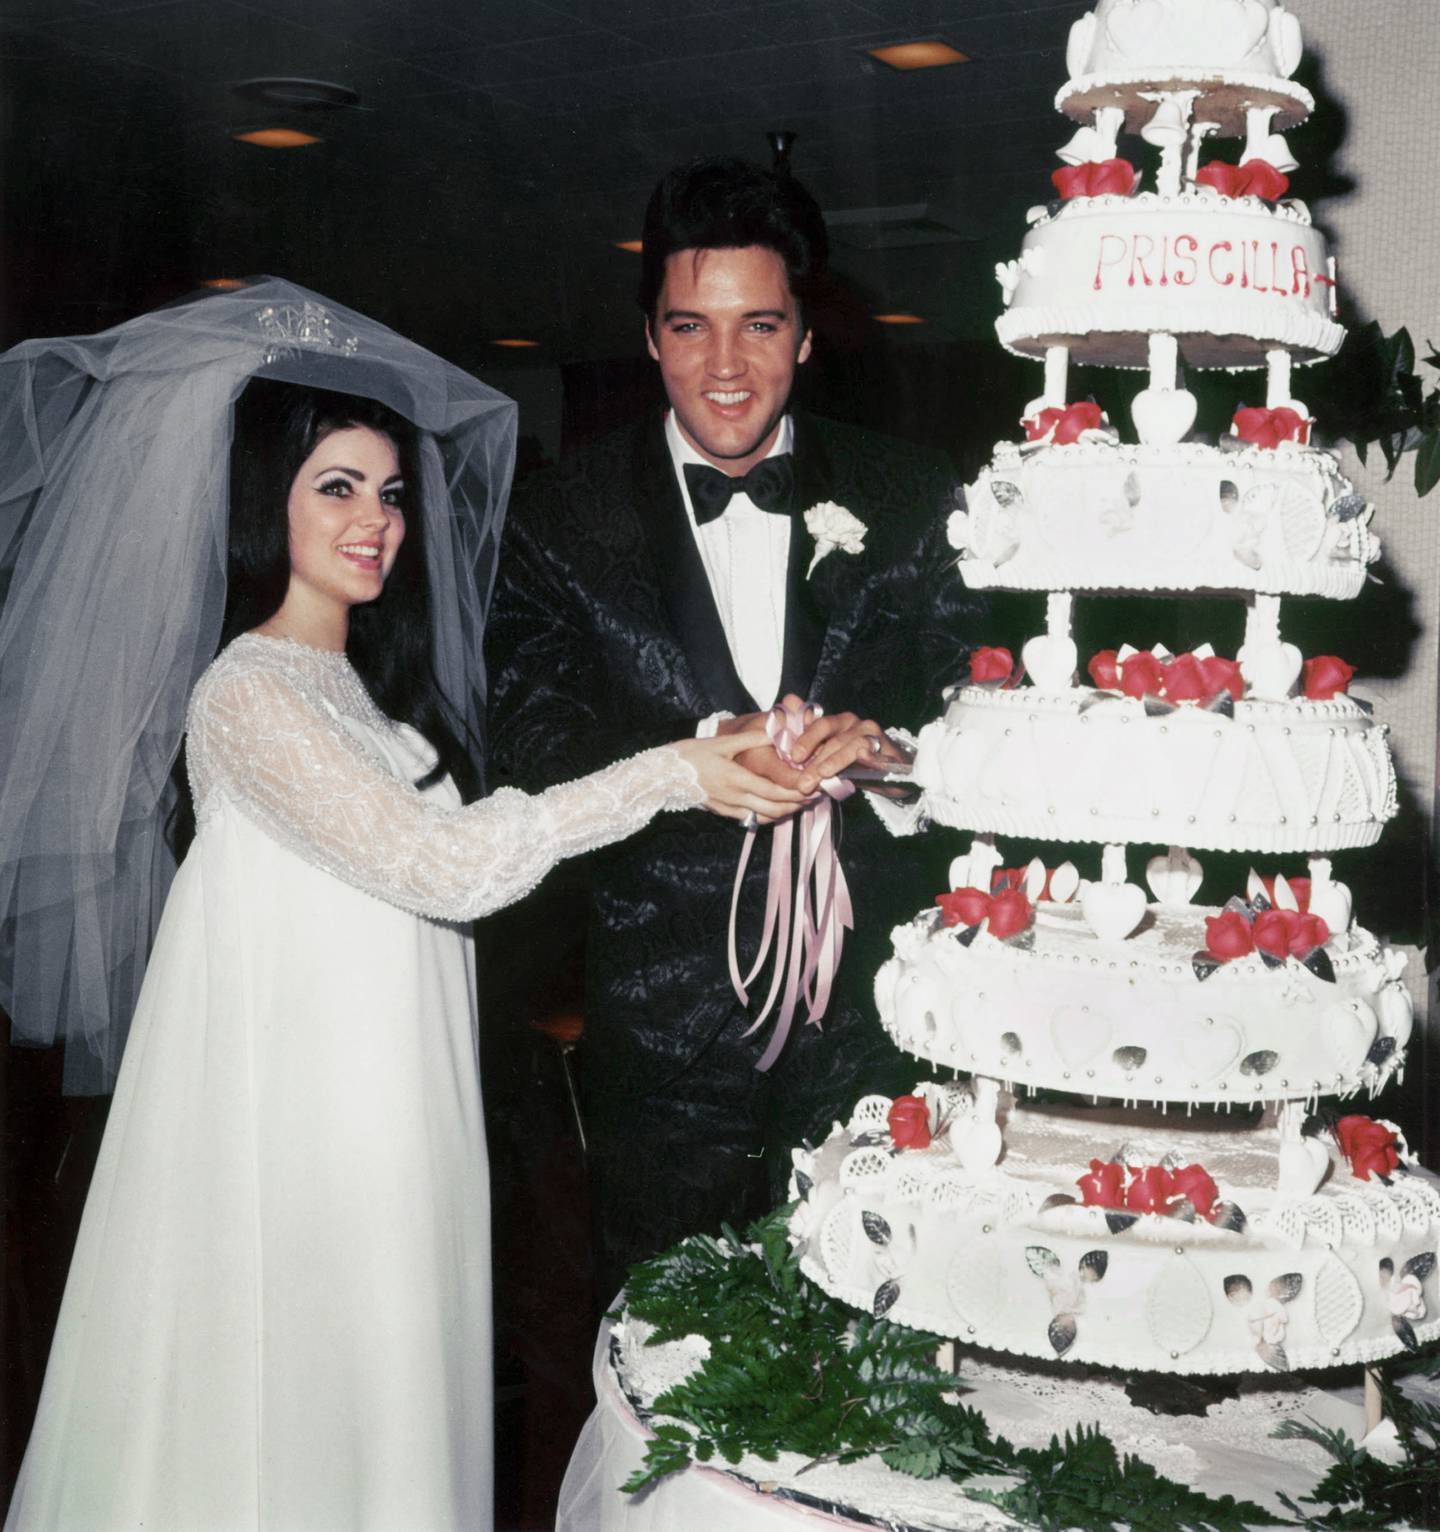 Elvis Presley and Priscilla Presley on their wedding day, May 1, 1967. Getty Images